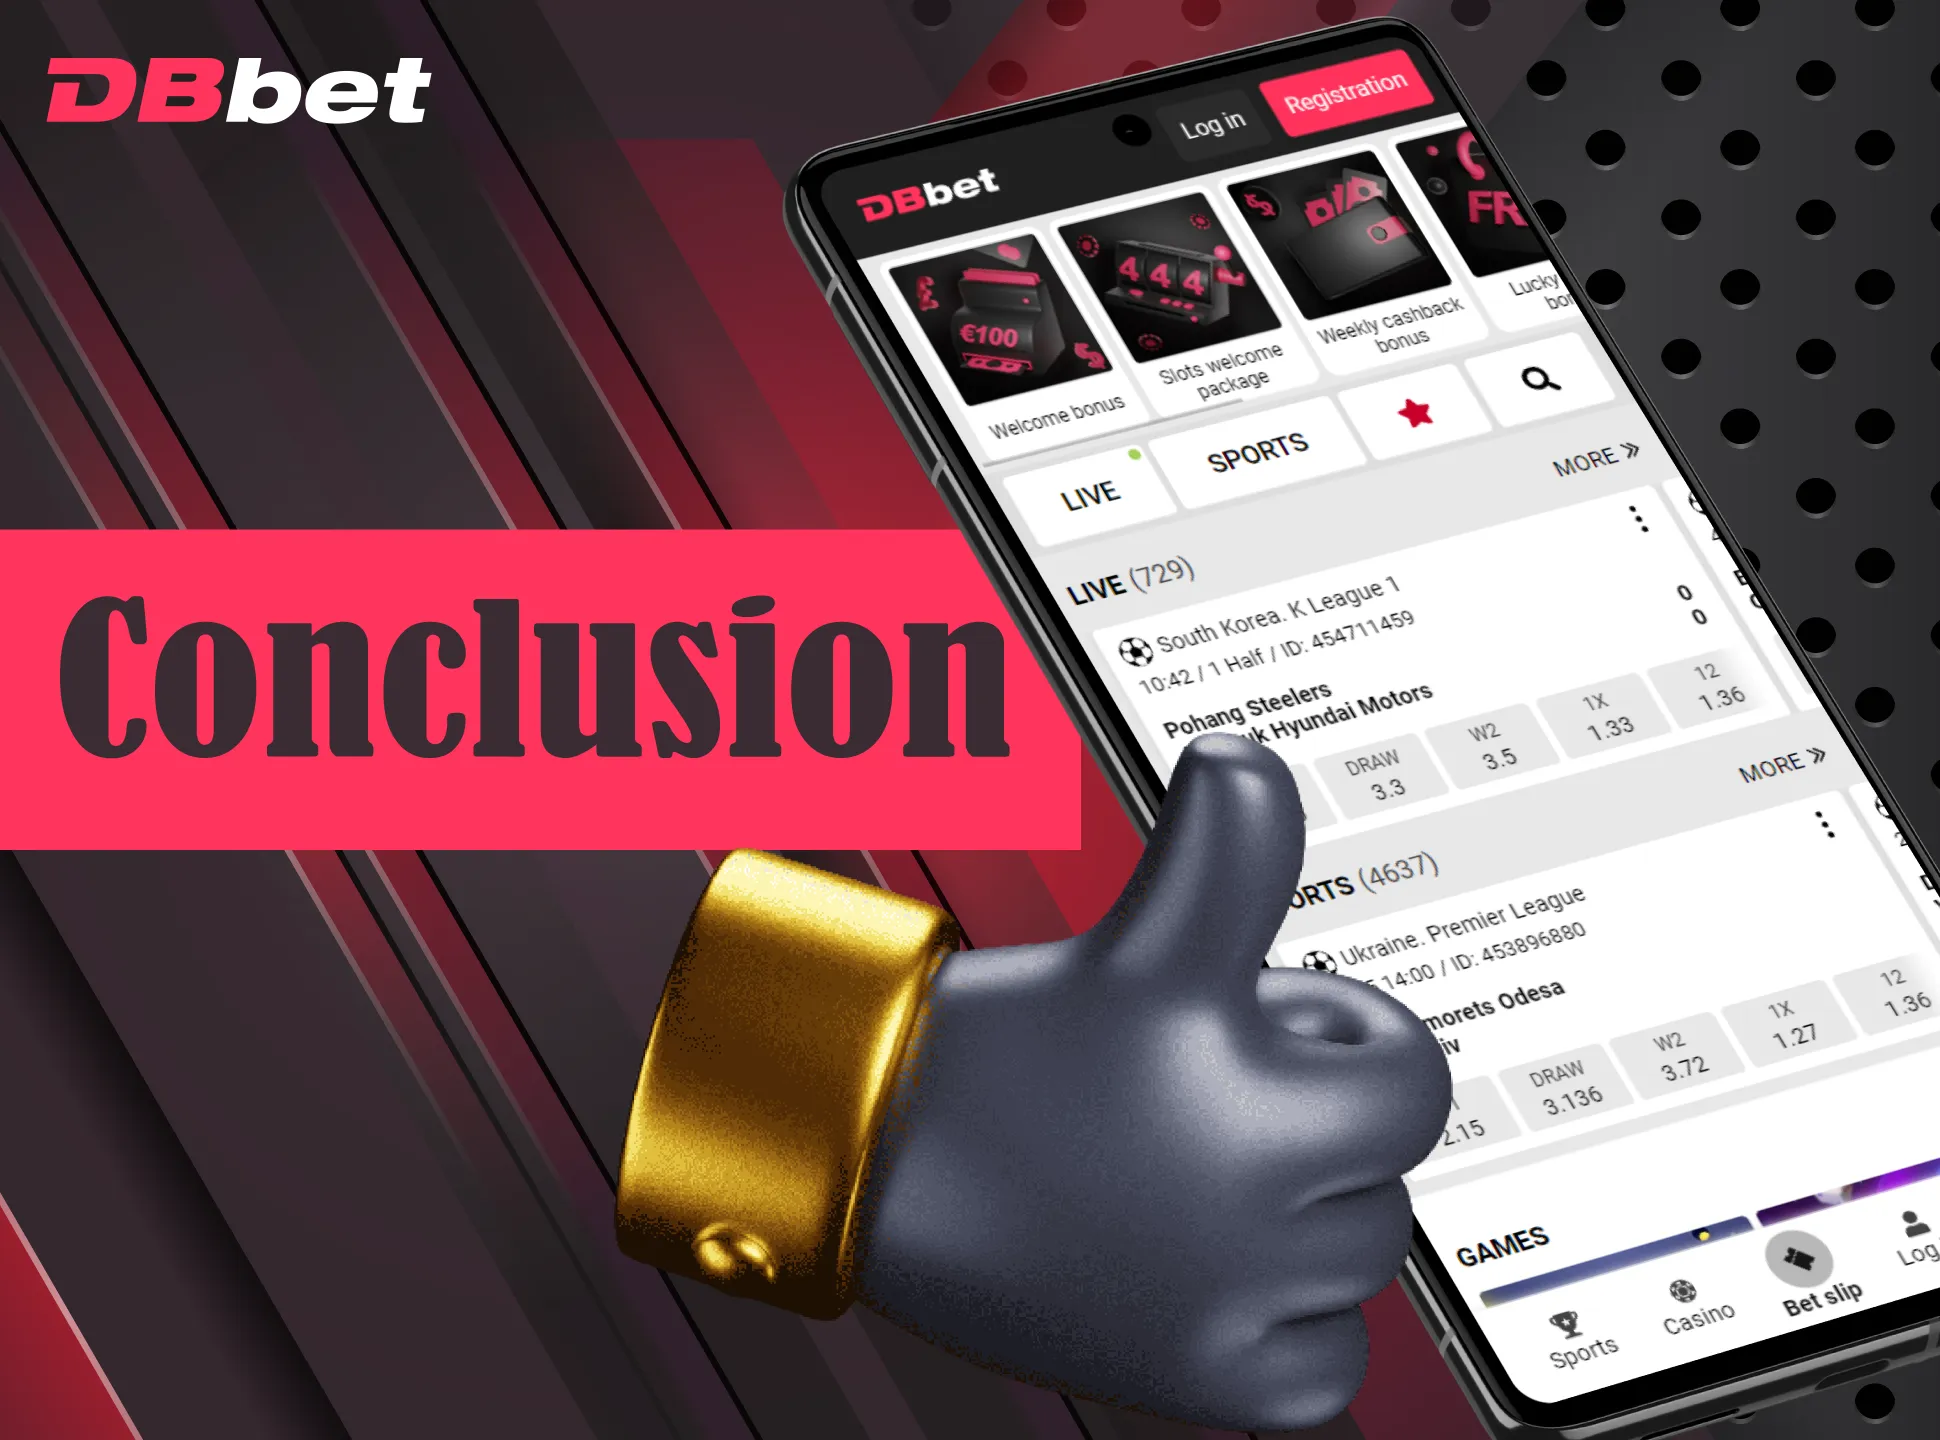 Learn more about features of DBbet app.